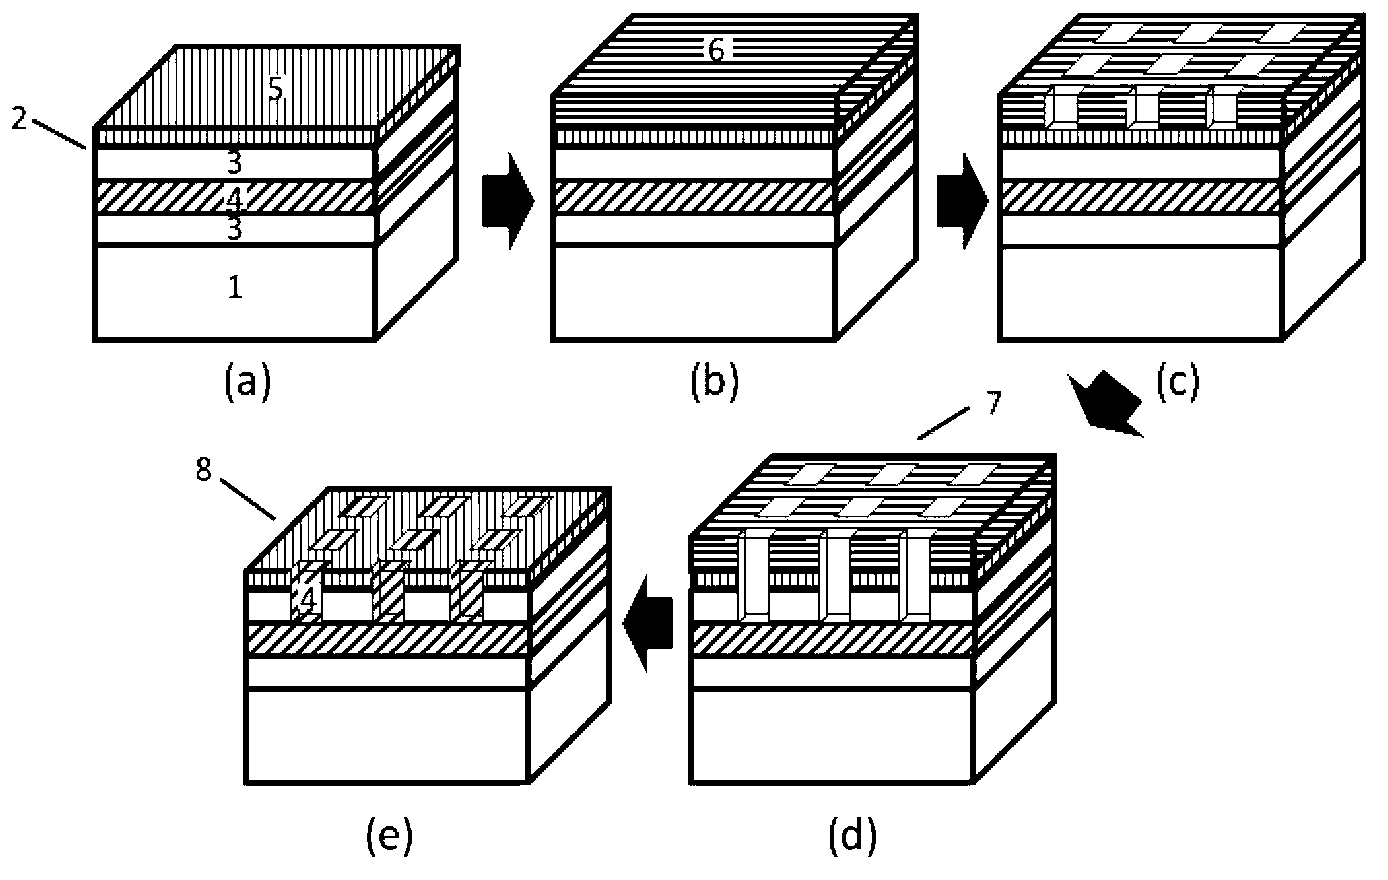 Tunable metamaterial absorber based on phase-change materials